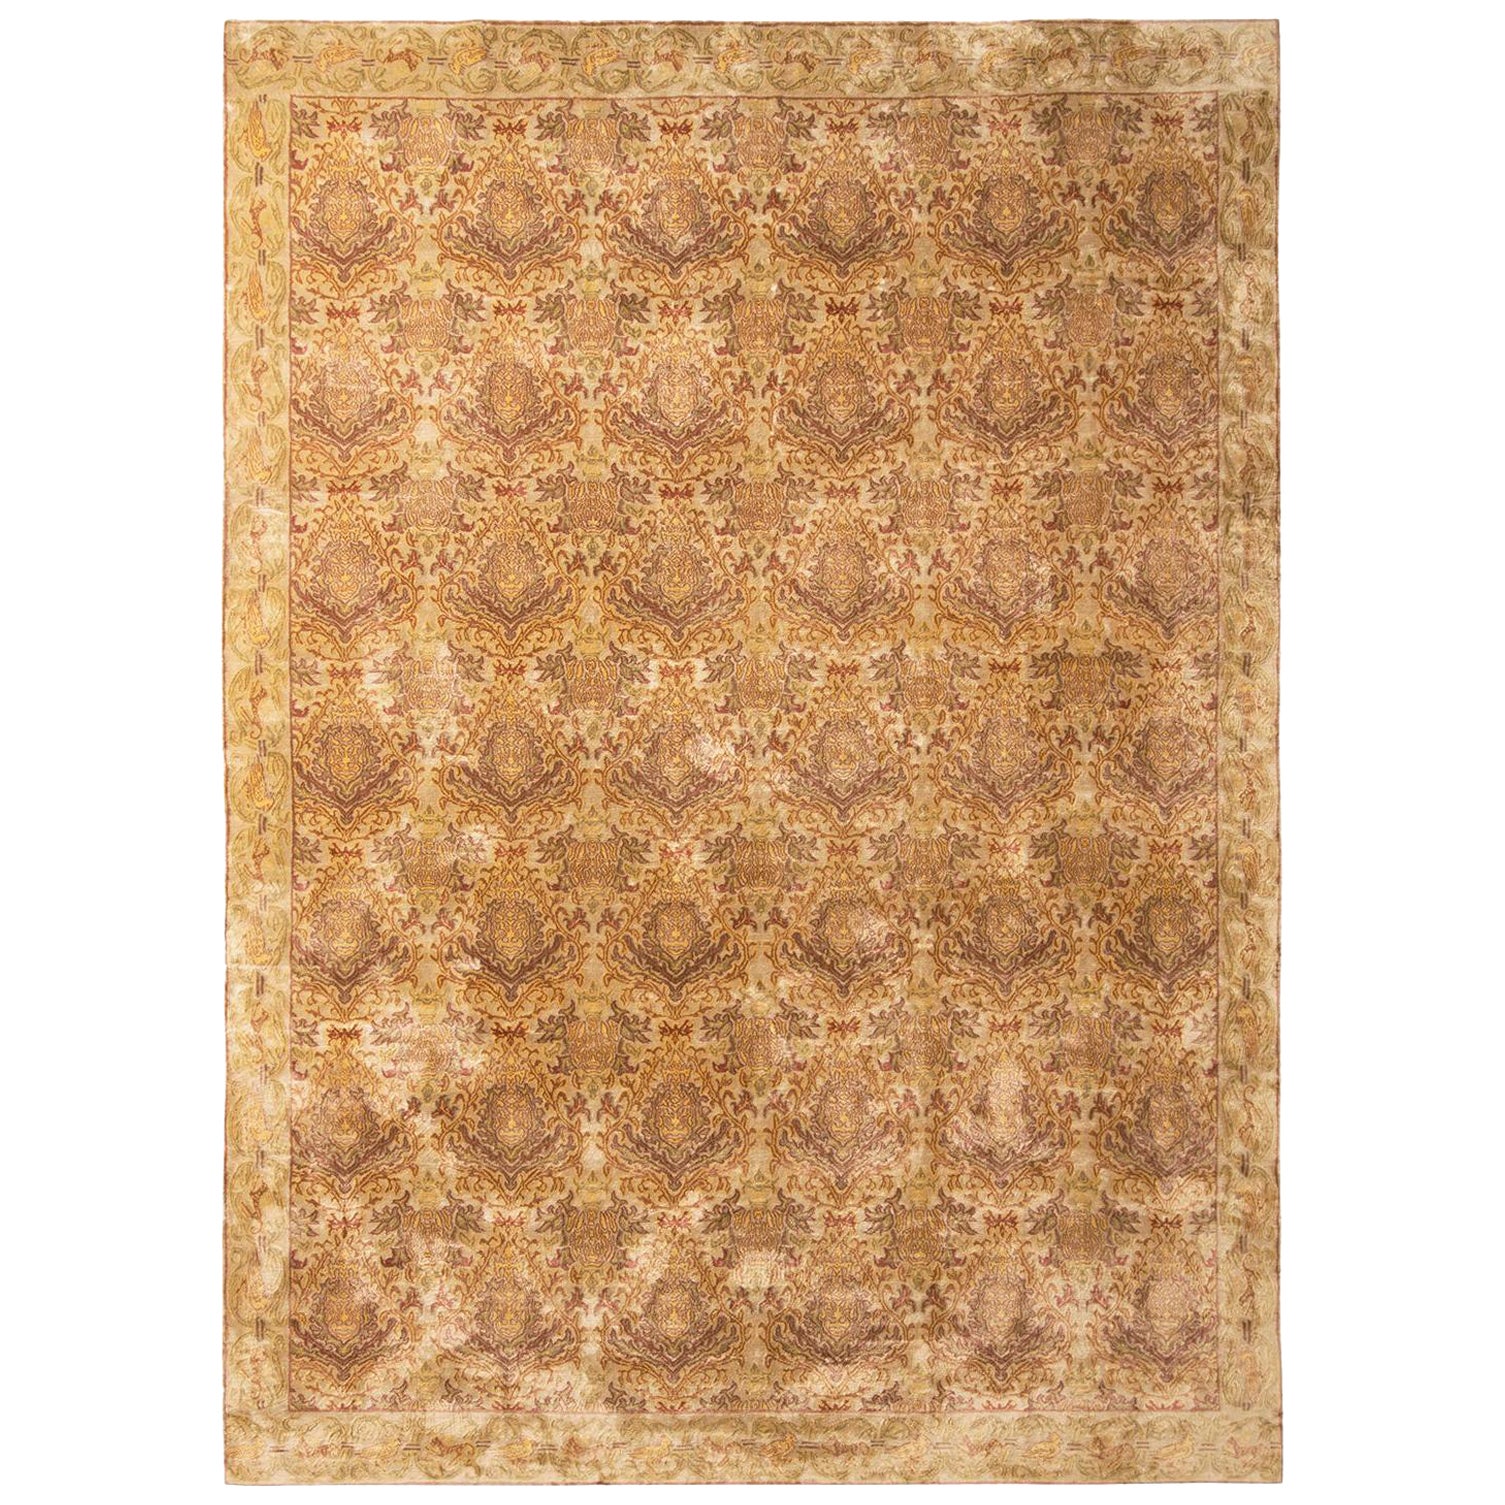 Rug & Kilim's Spanish European Style Rug in Gold, Green, Maroon Floral Pattern For Sale